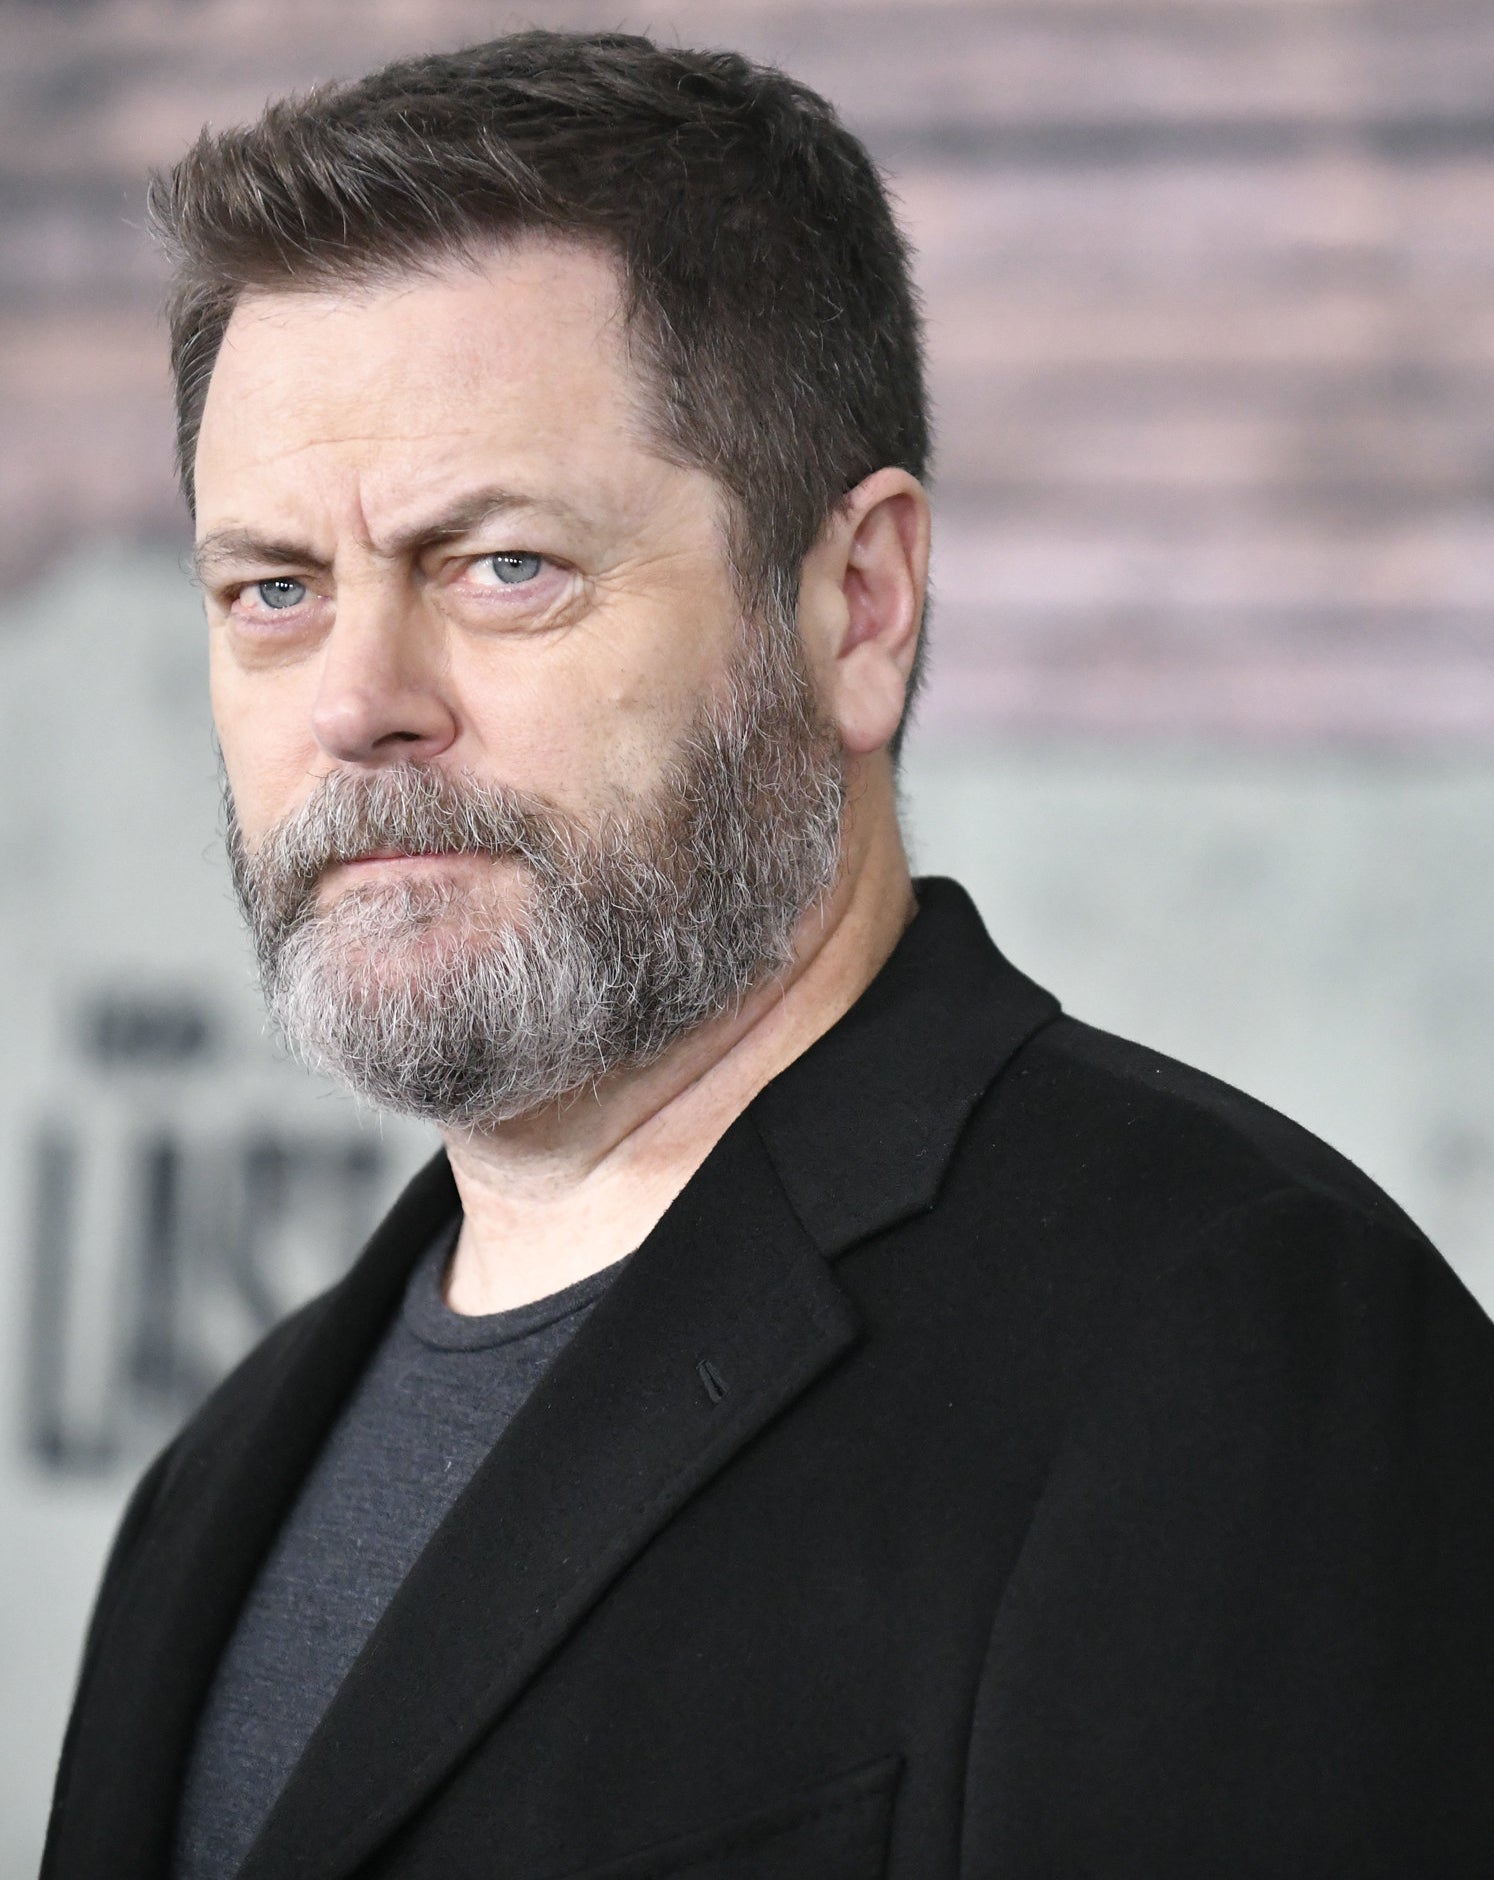 Nick Offerman on the red carpet